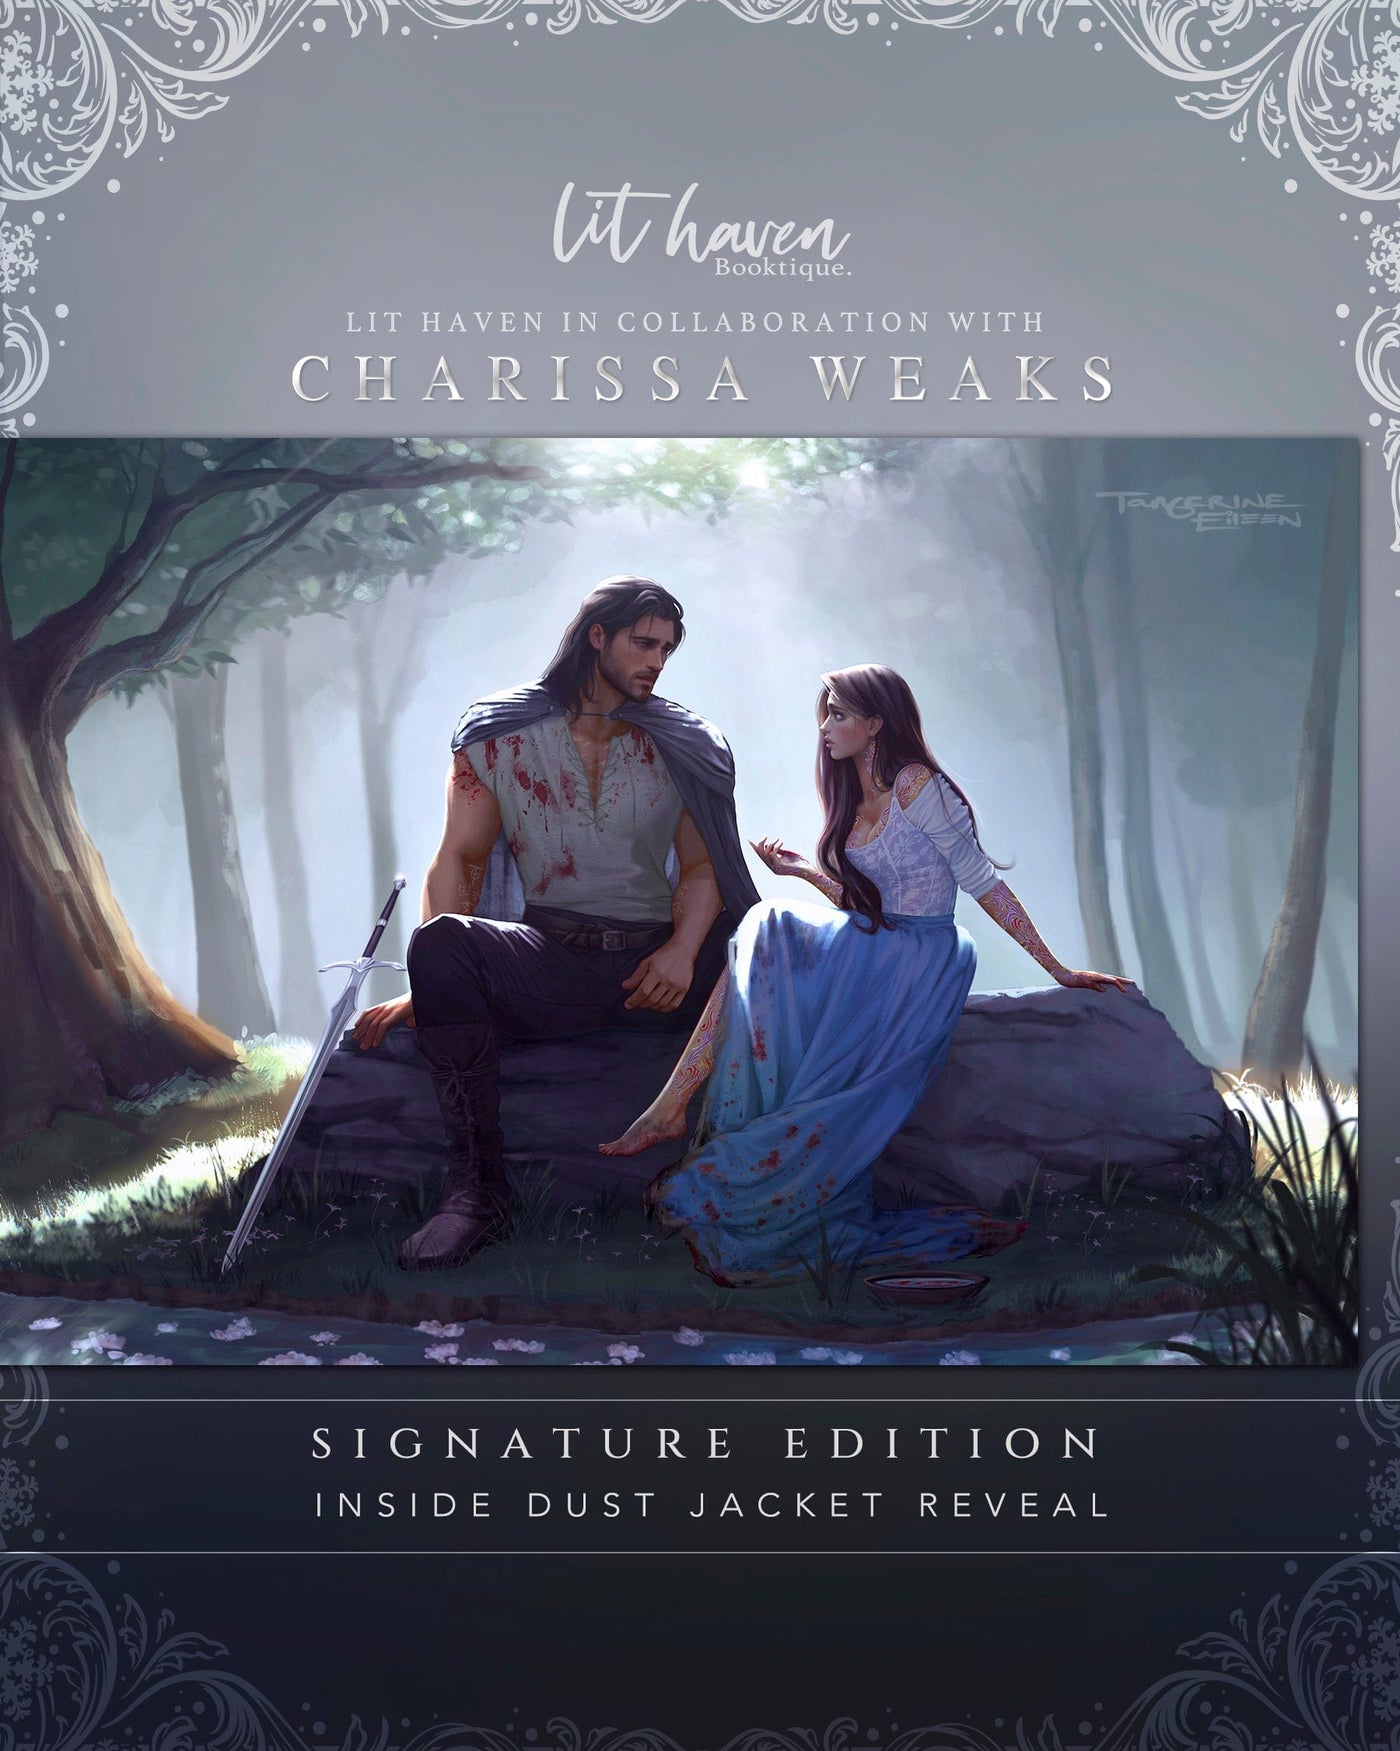 Lit Haven Booktique Book SIGNED TIP-IN | The Witch Collector Hardcover Preorder